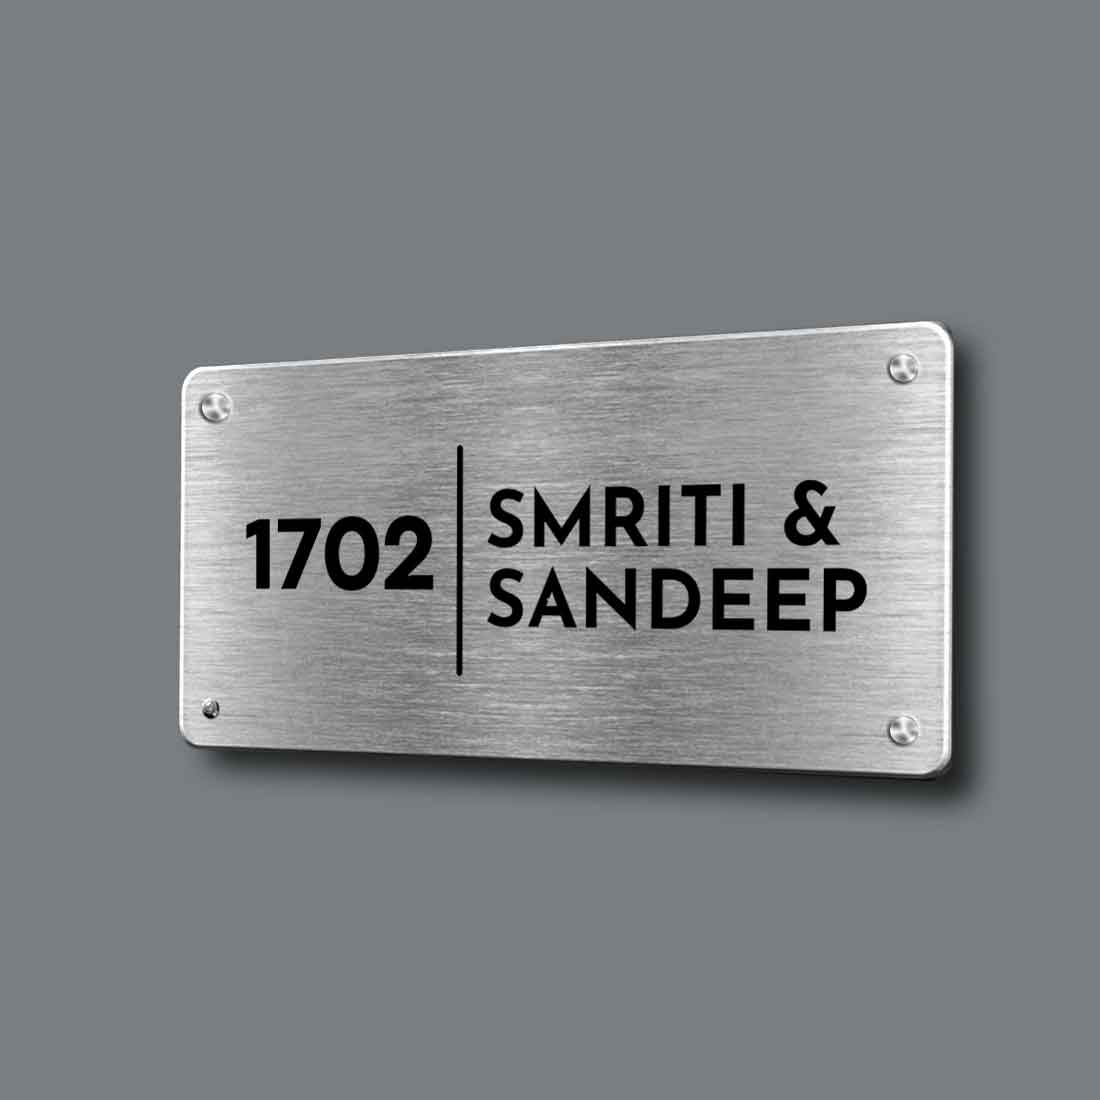 Custom Engraved Outdoor Metal Name Plates for Office Home Flats